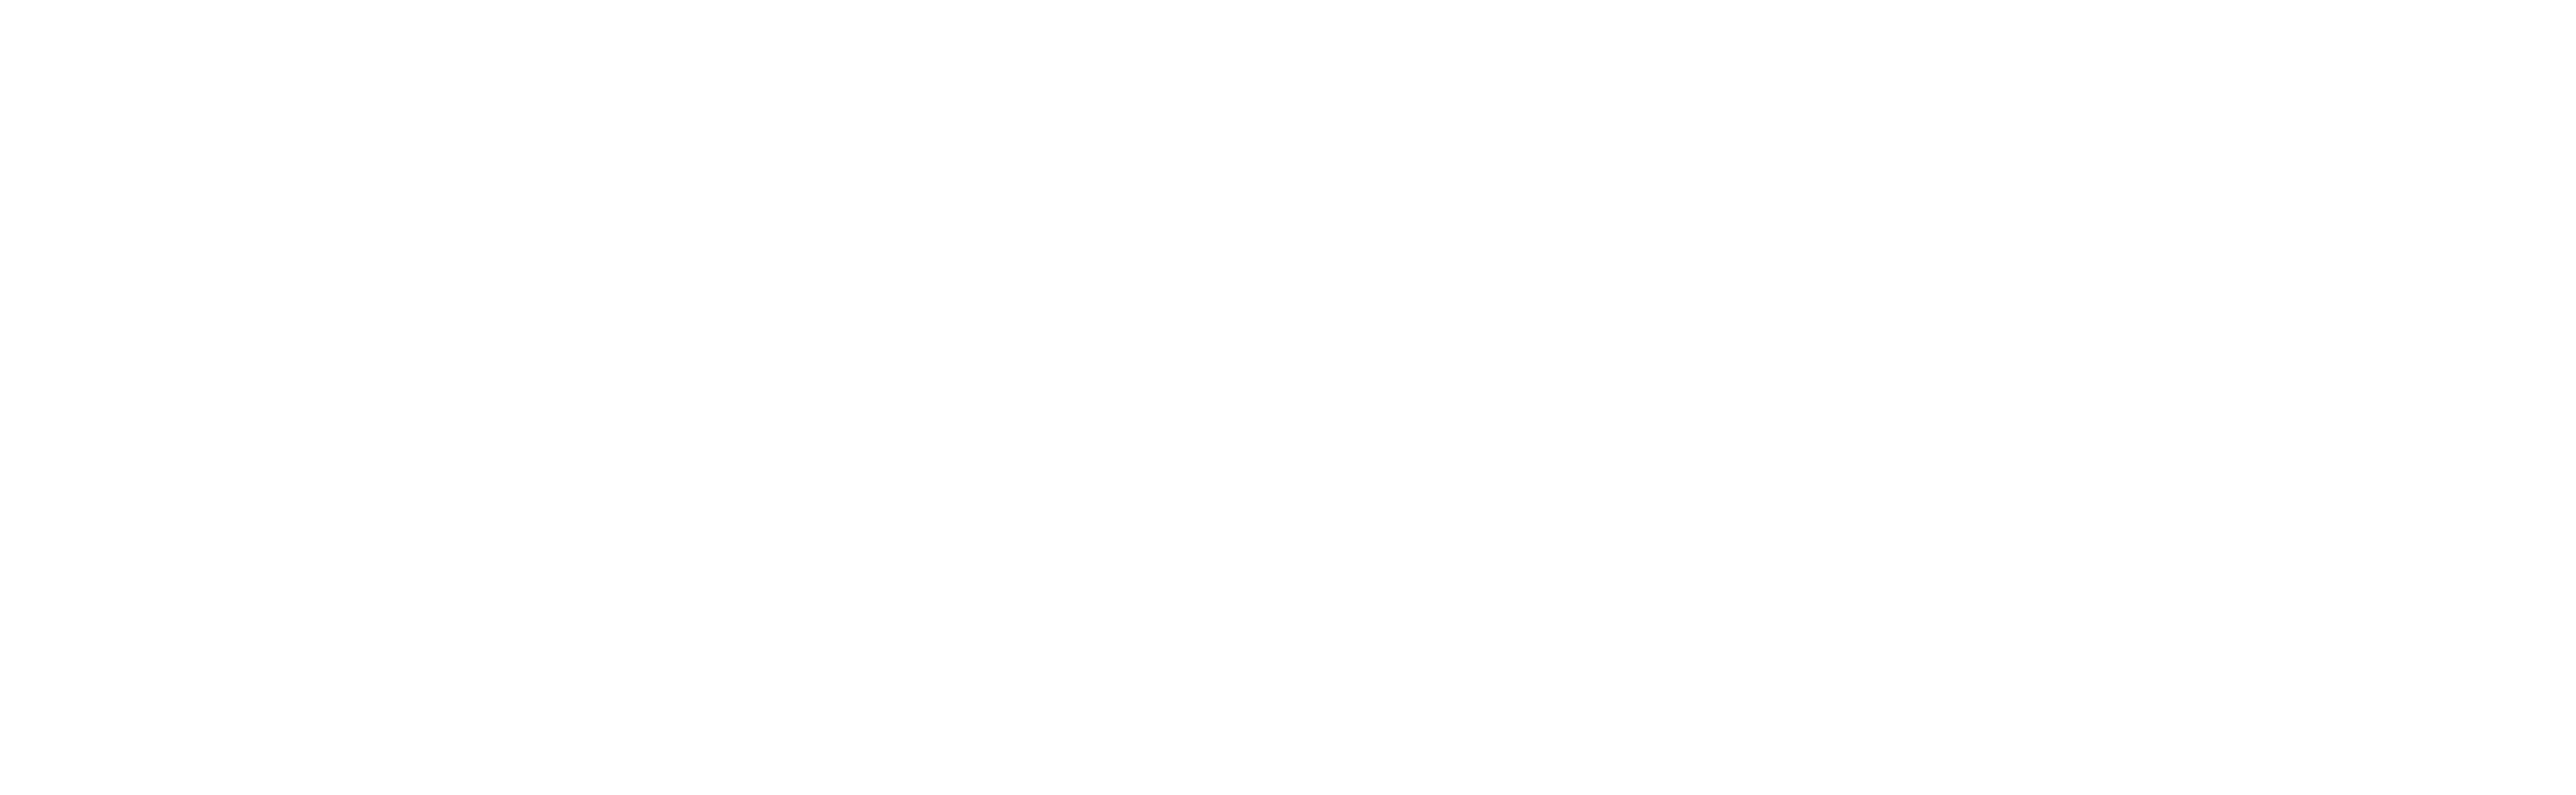 The Wordy Word